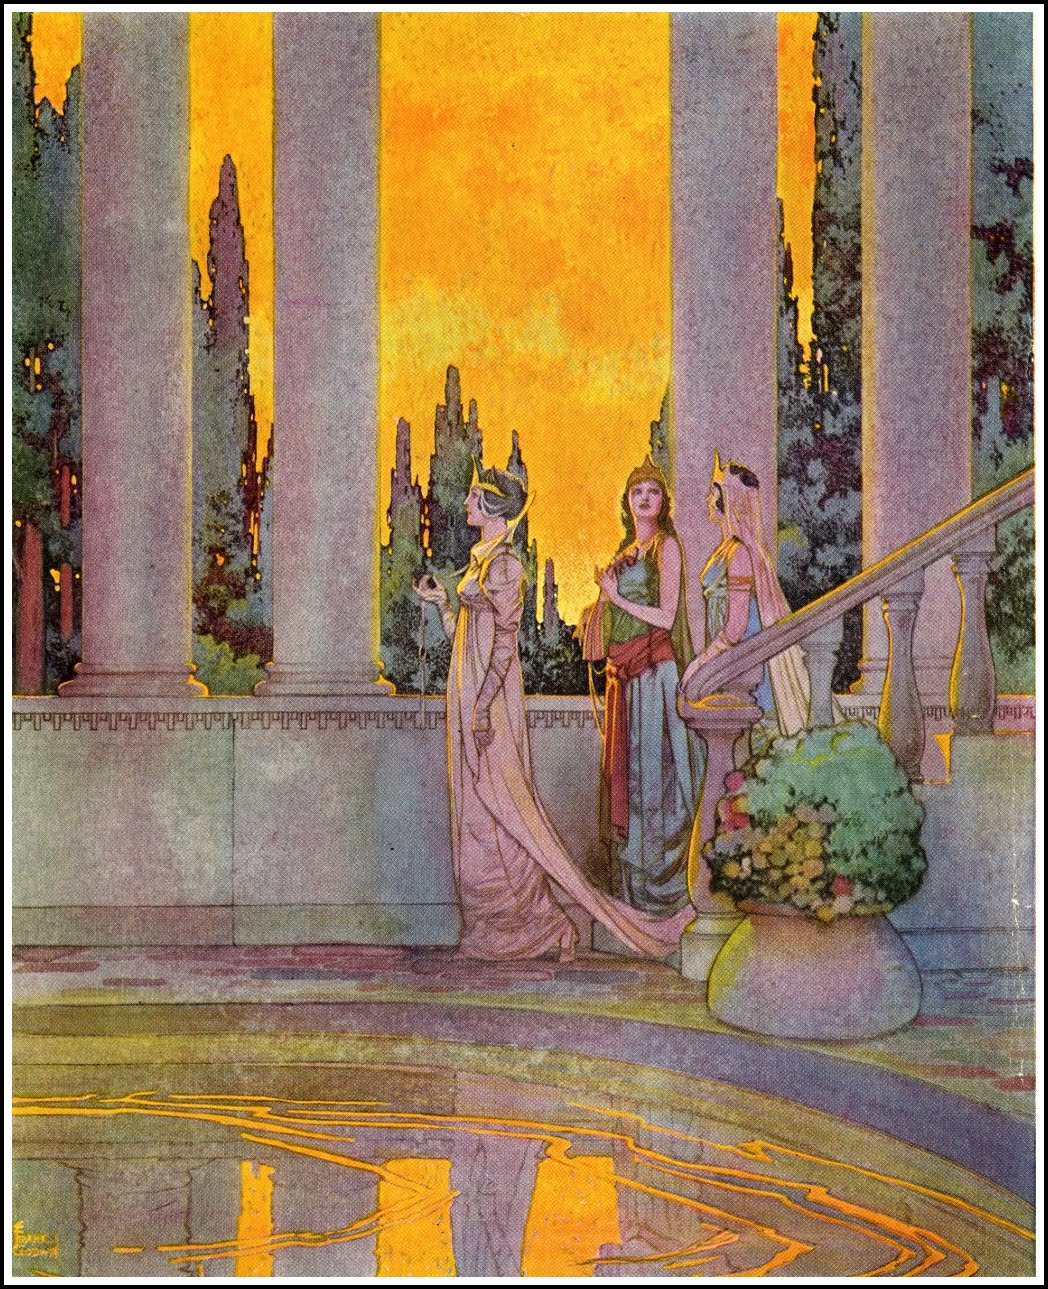 story book painting of 3 princeses by Frank Godwin